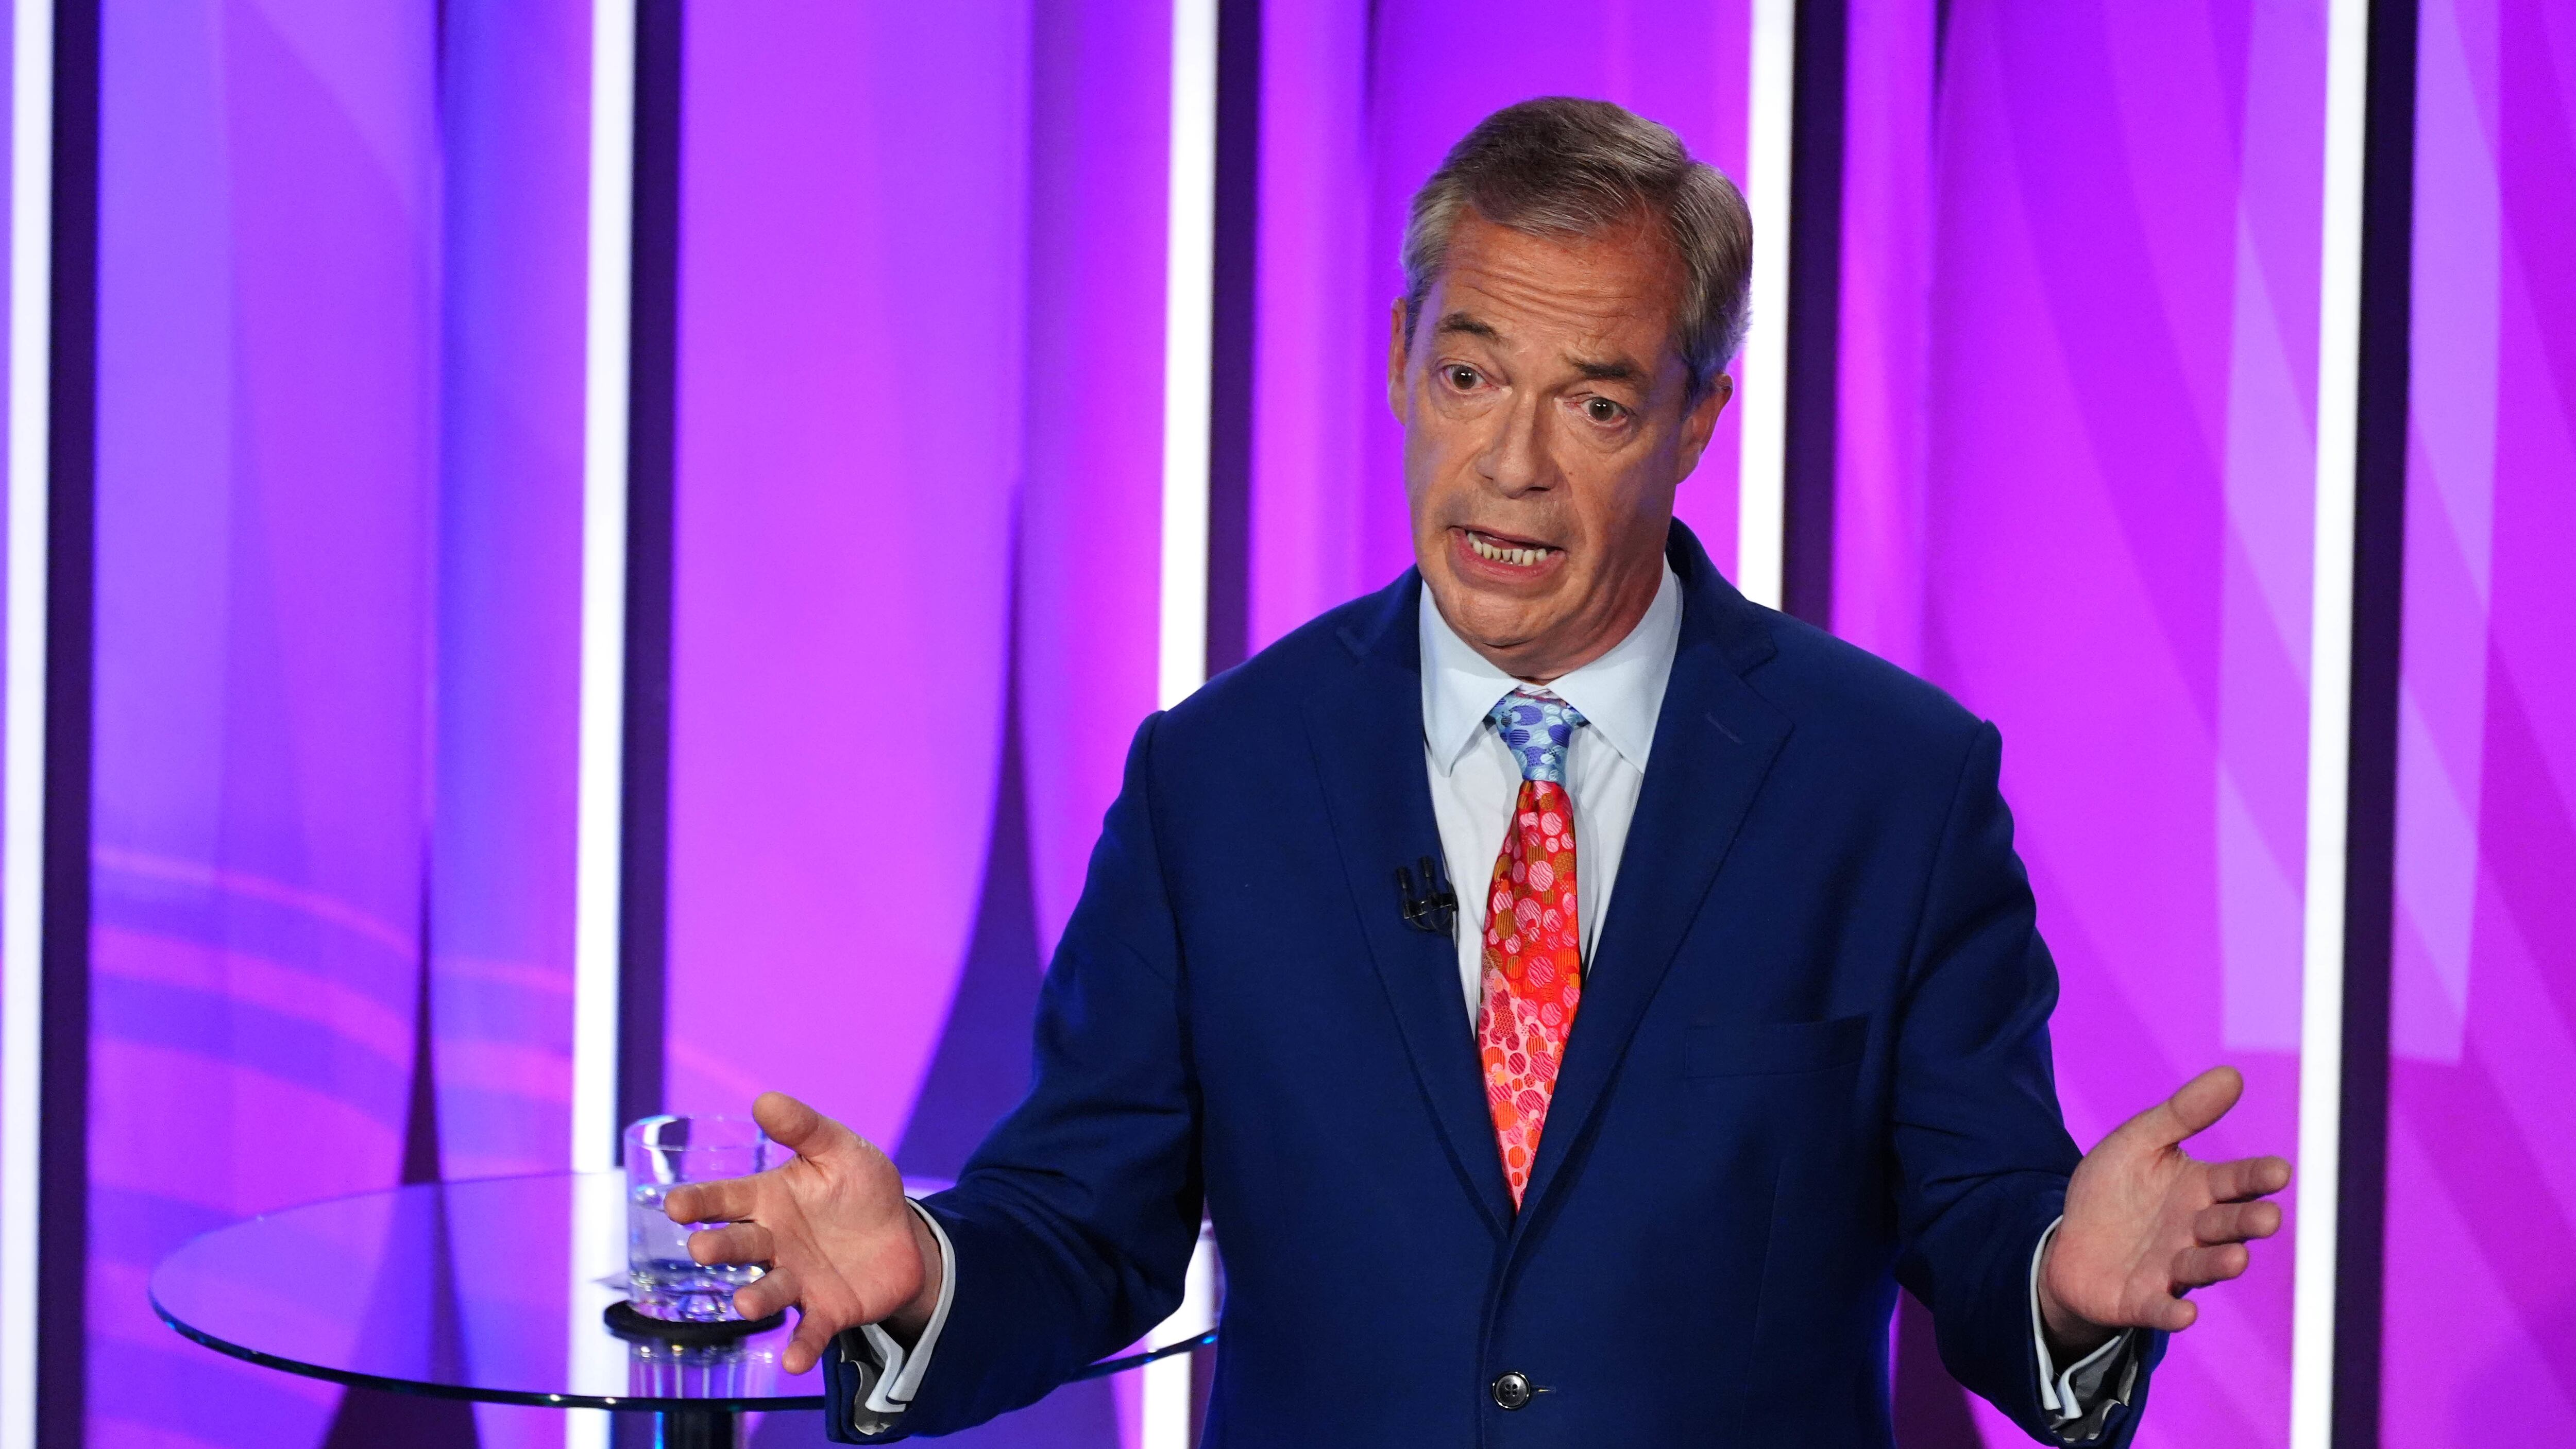 Reform UK leader Nigel Farage speaking during a BBC Question Time Leaders’ Special